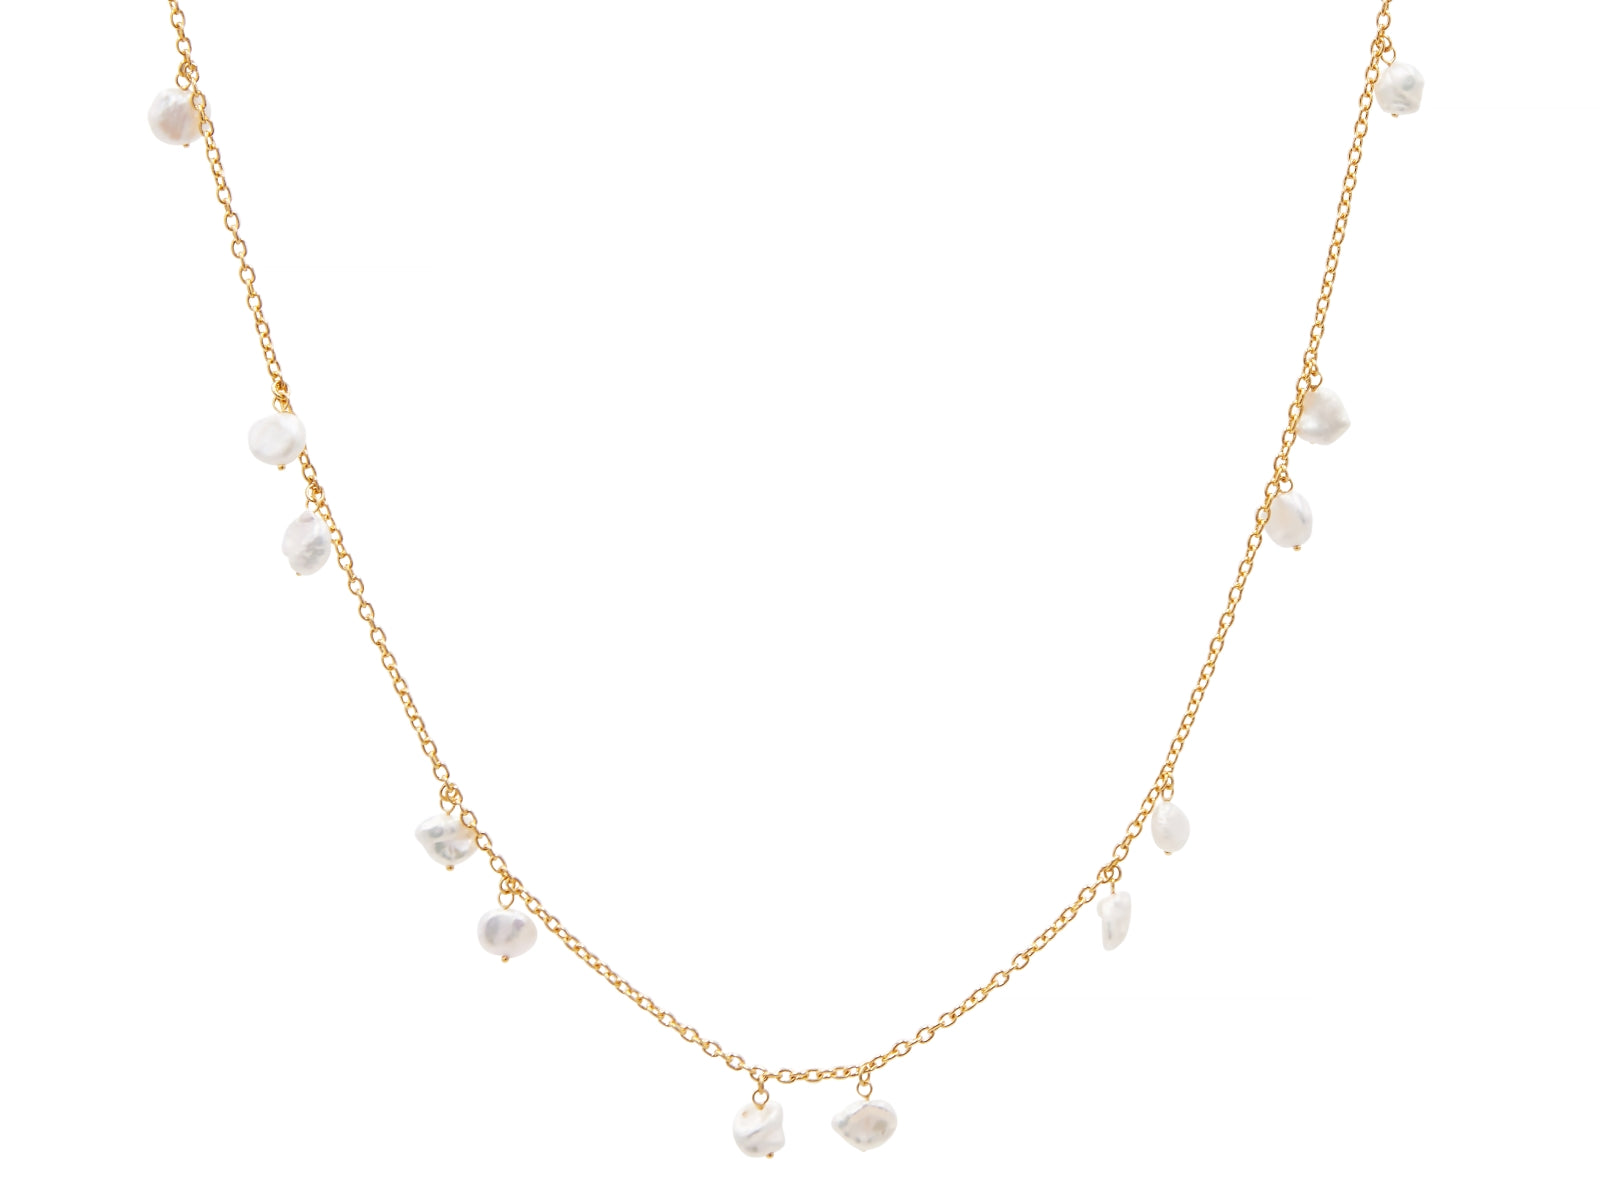 GURHAN Spell Gold Station Short Necklace, Thin Chain, with Diamond